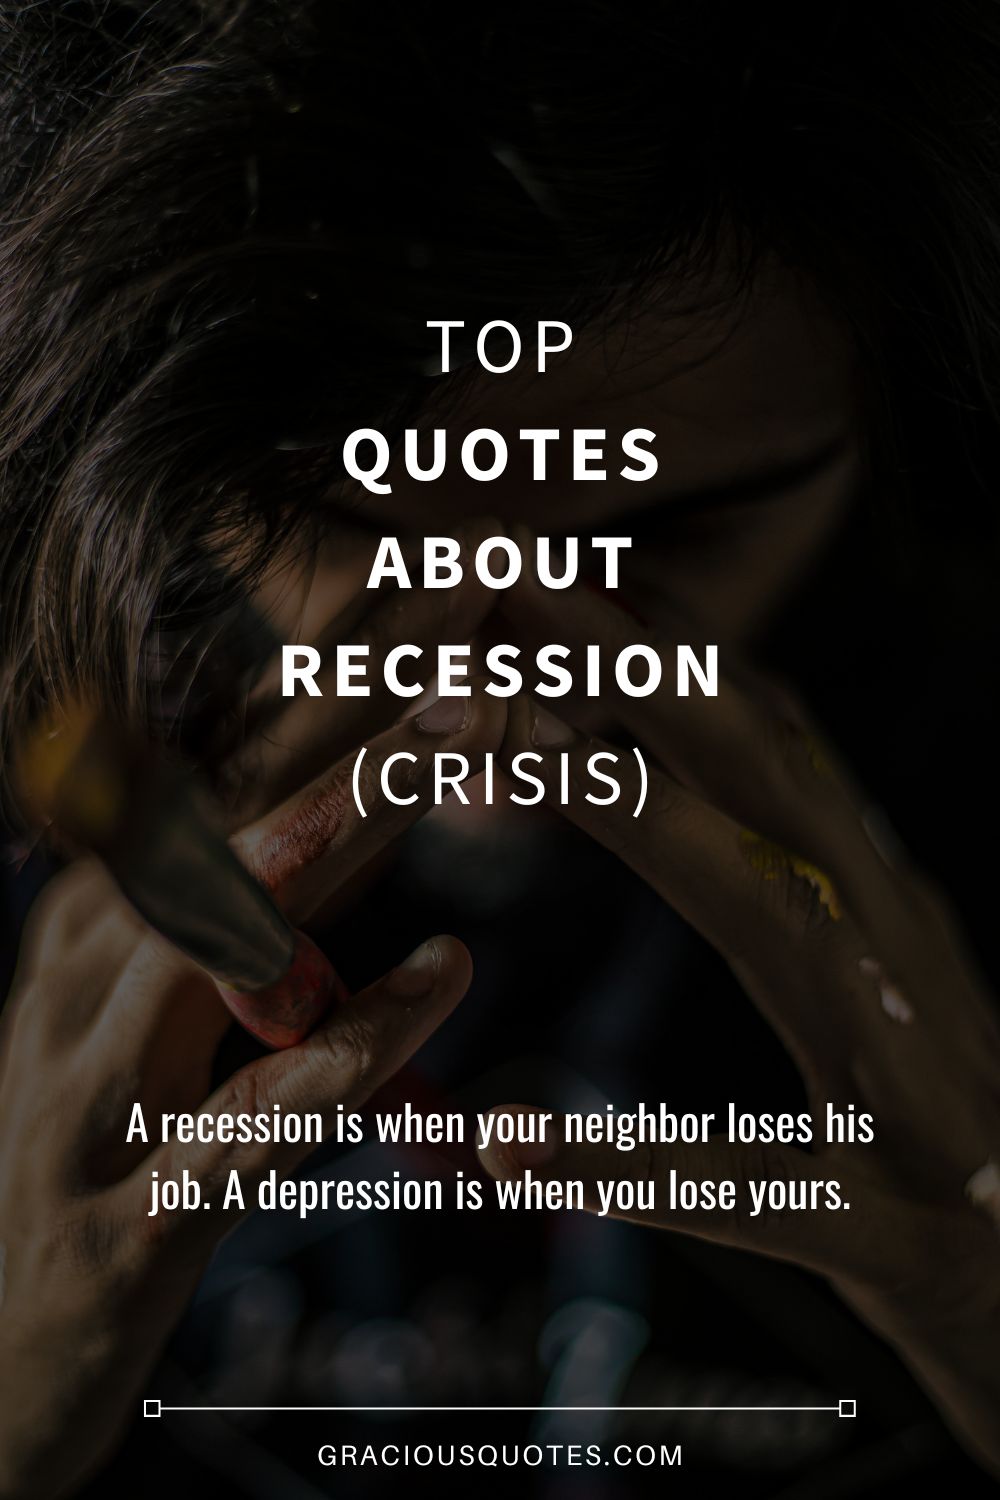 Top Quotes About Recession (CRISIS) - Gracious Quotes